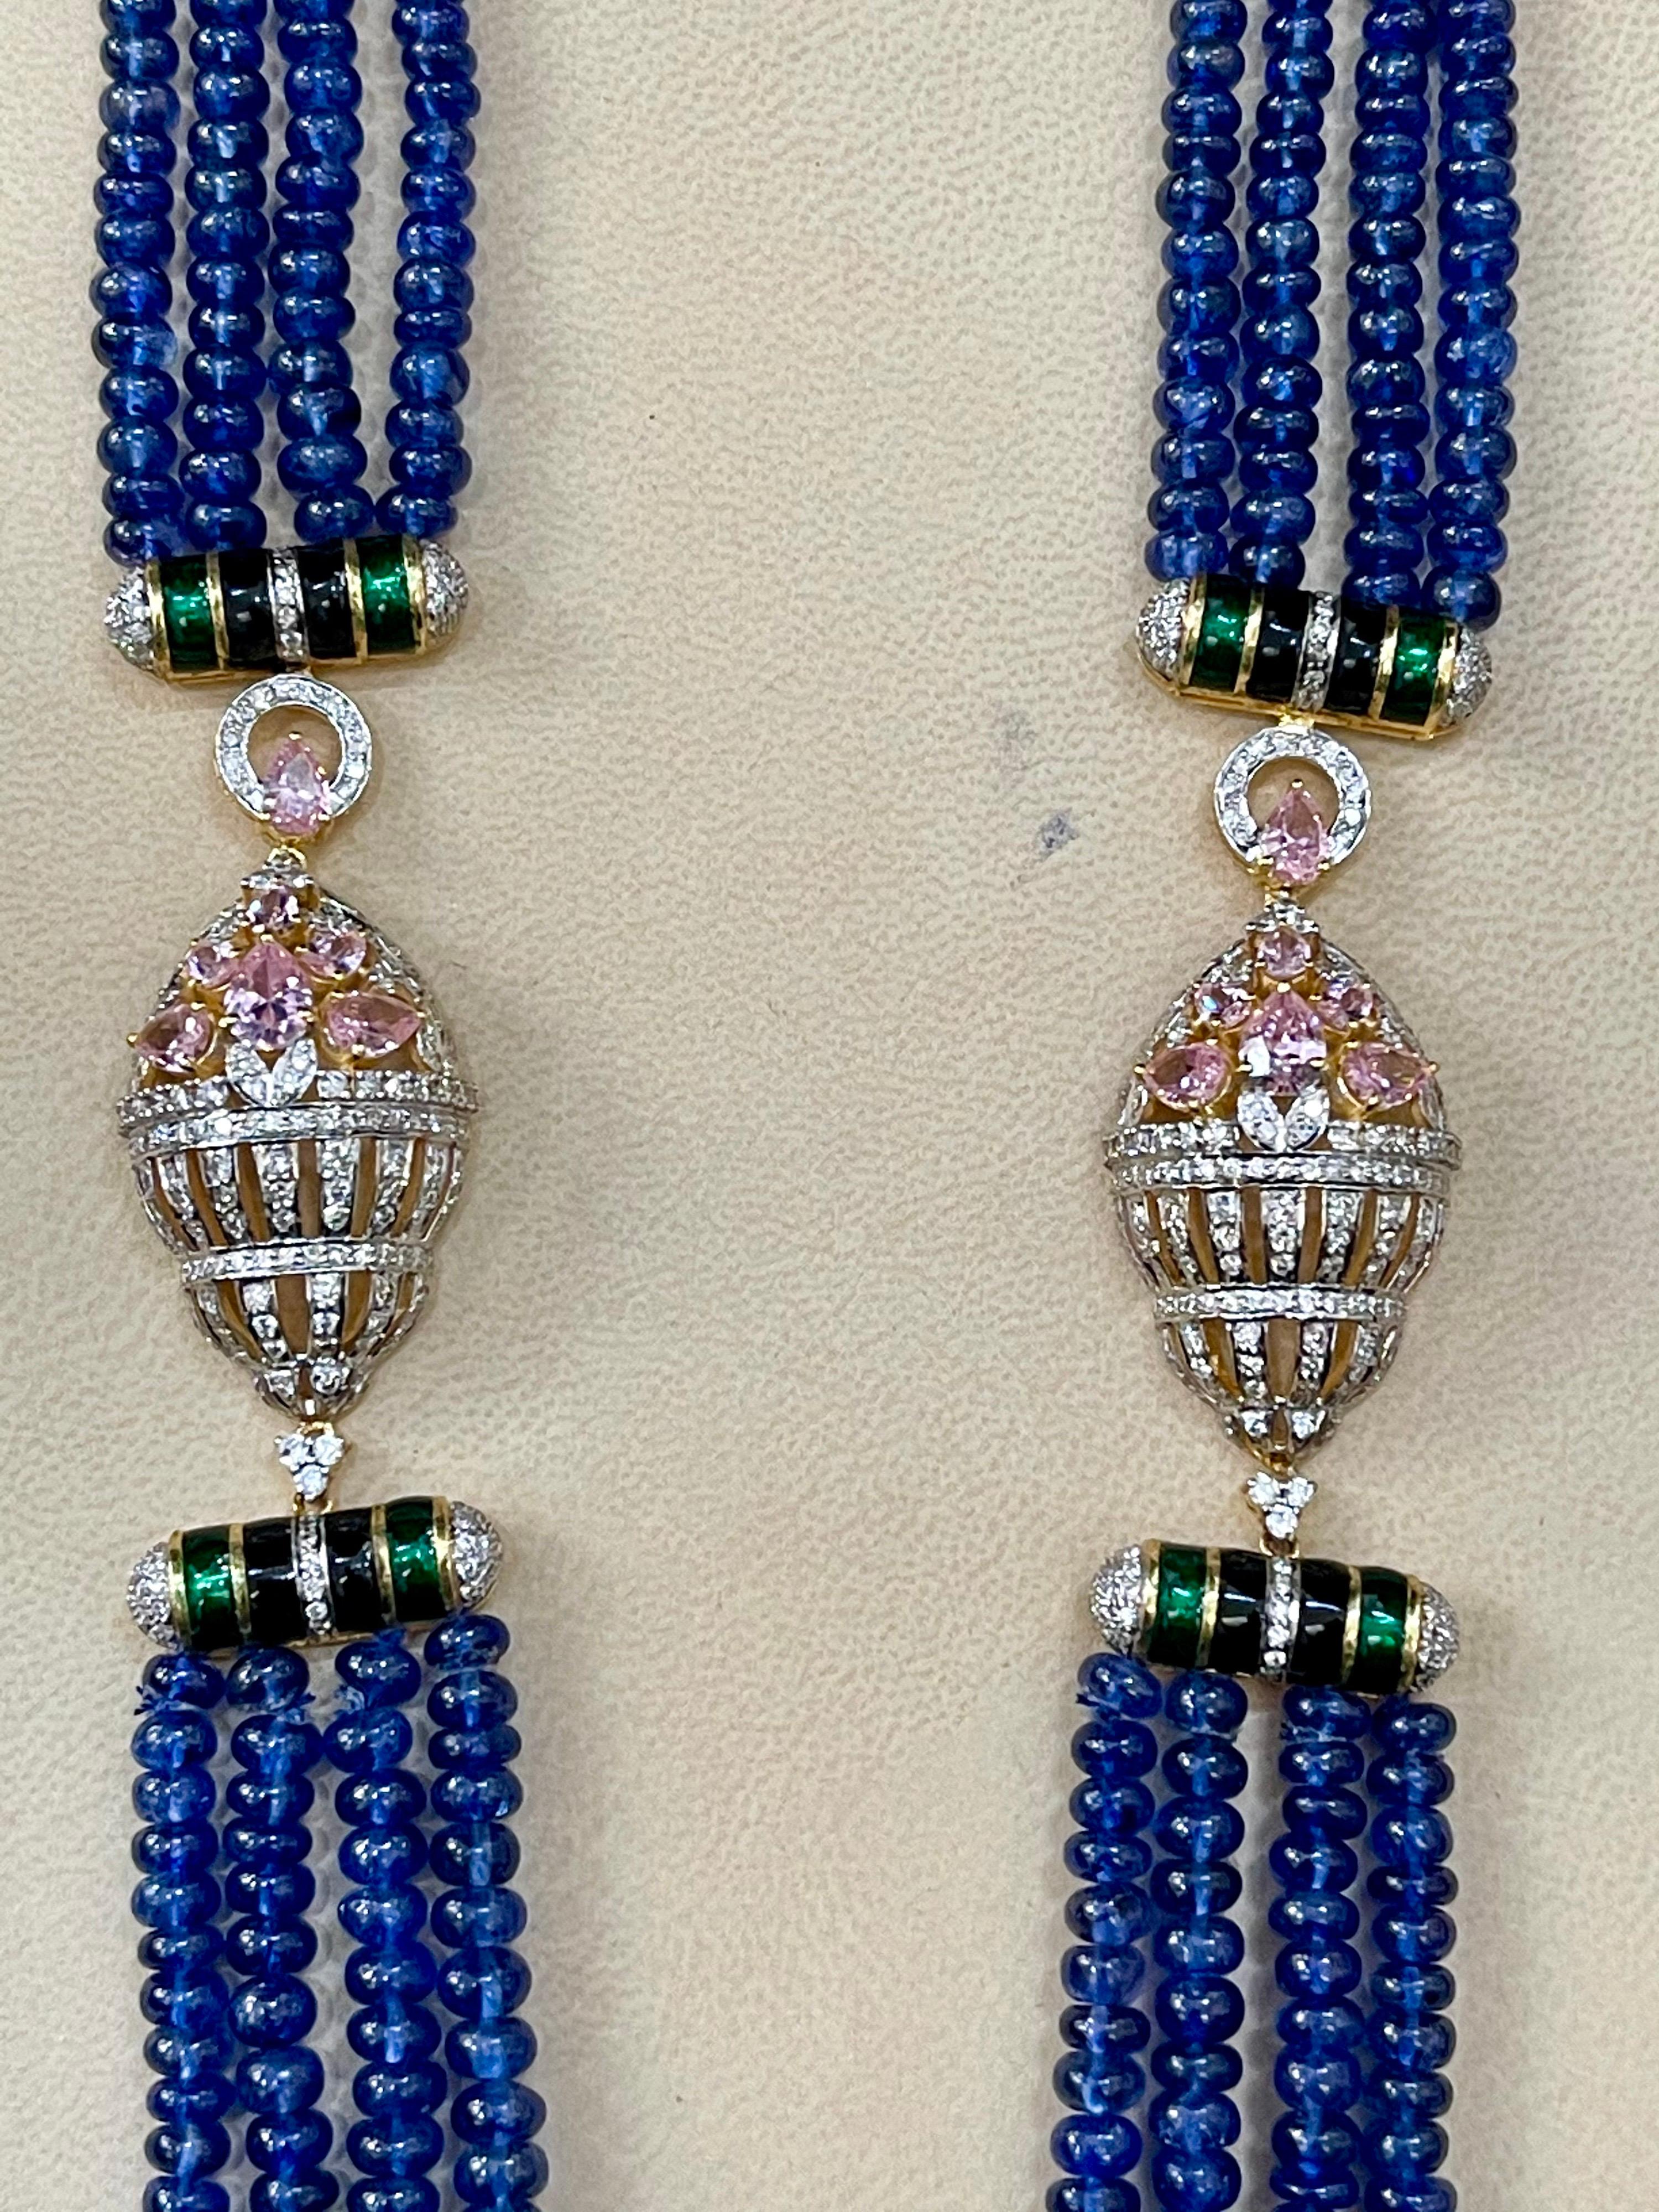 575 Ct Natural Tanzanite Bead Four Strand Necklace + 6.5 Ct Diamond 14 K Y Gold In Excellent Condition For Sale In New York, NY